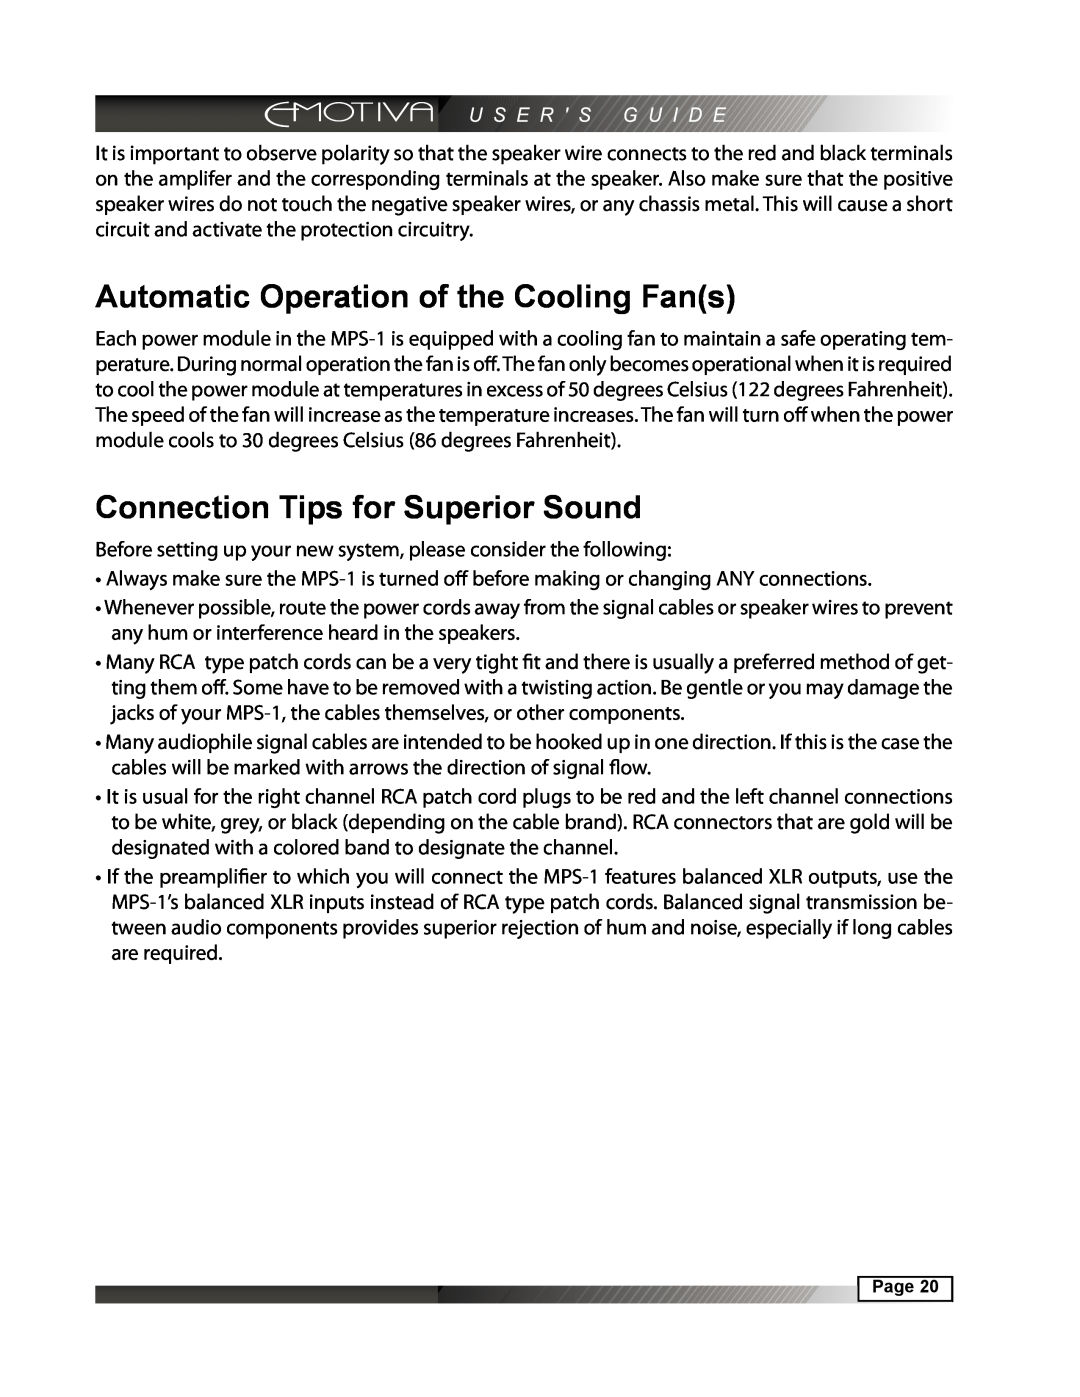 Emotiva MPS-1 manual Automatic Operation of the Cooling Fans, Connection Tips for Superior Sound 